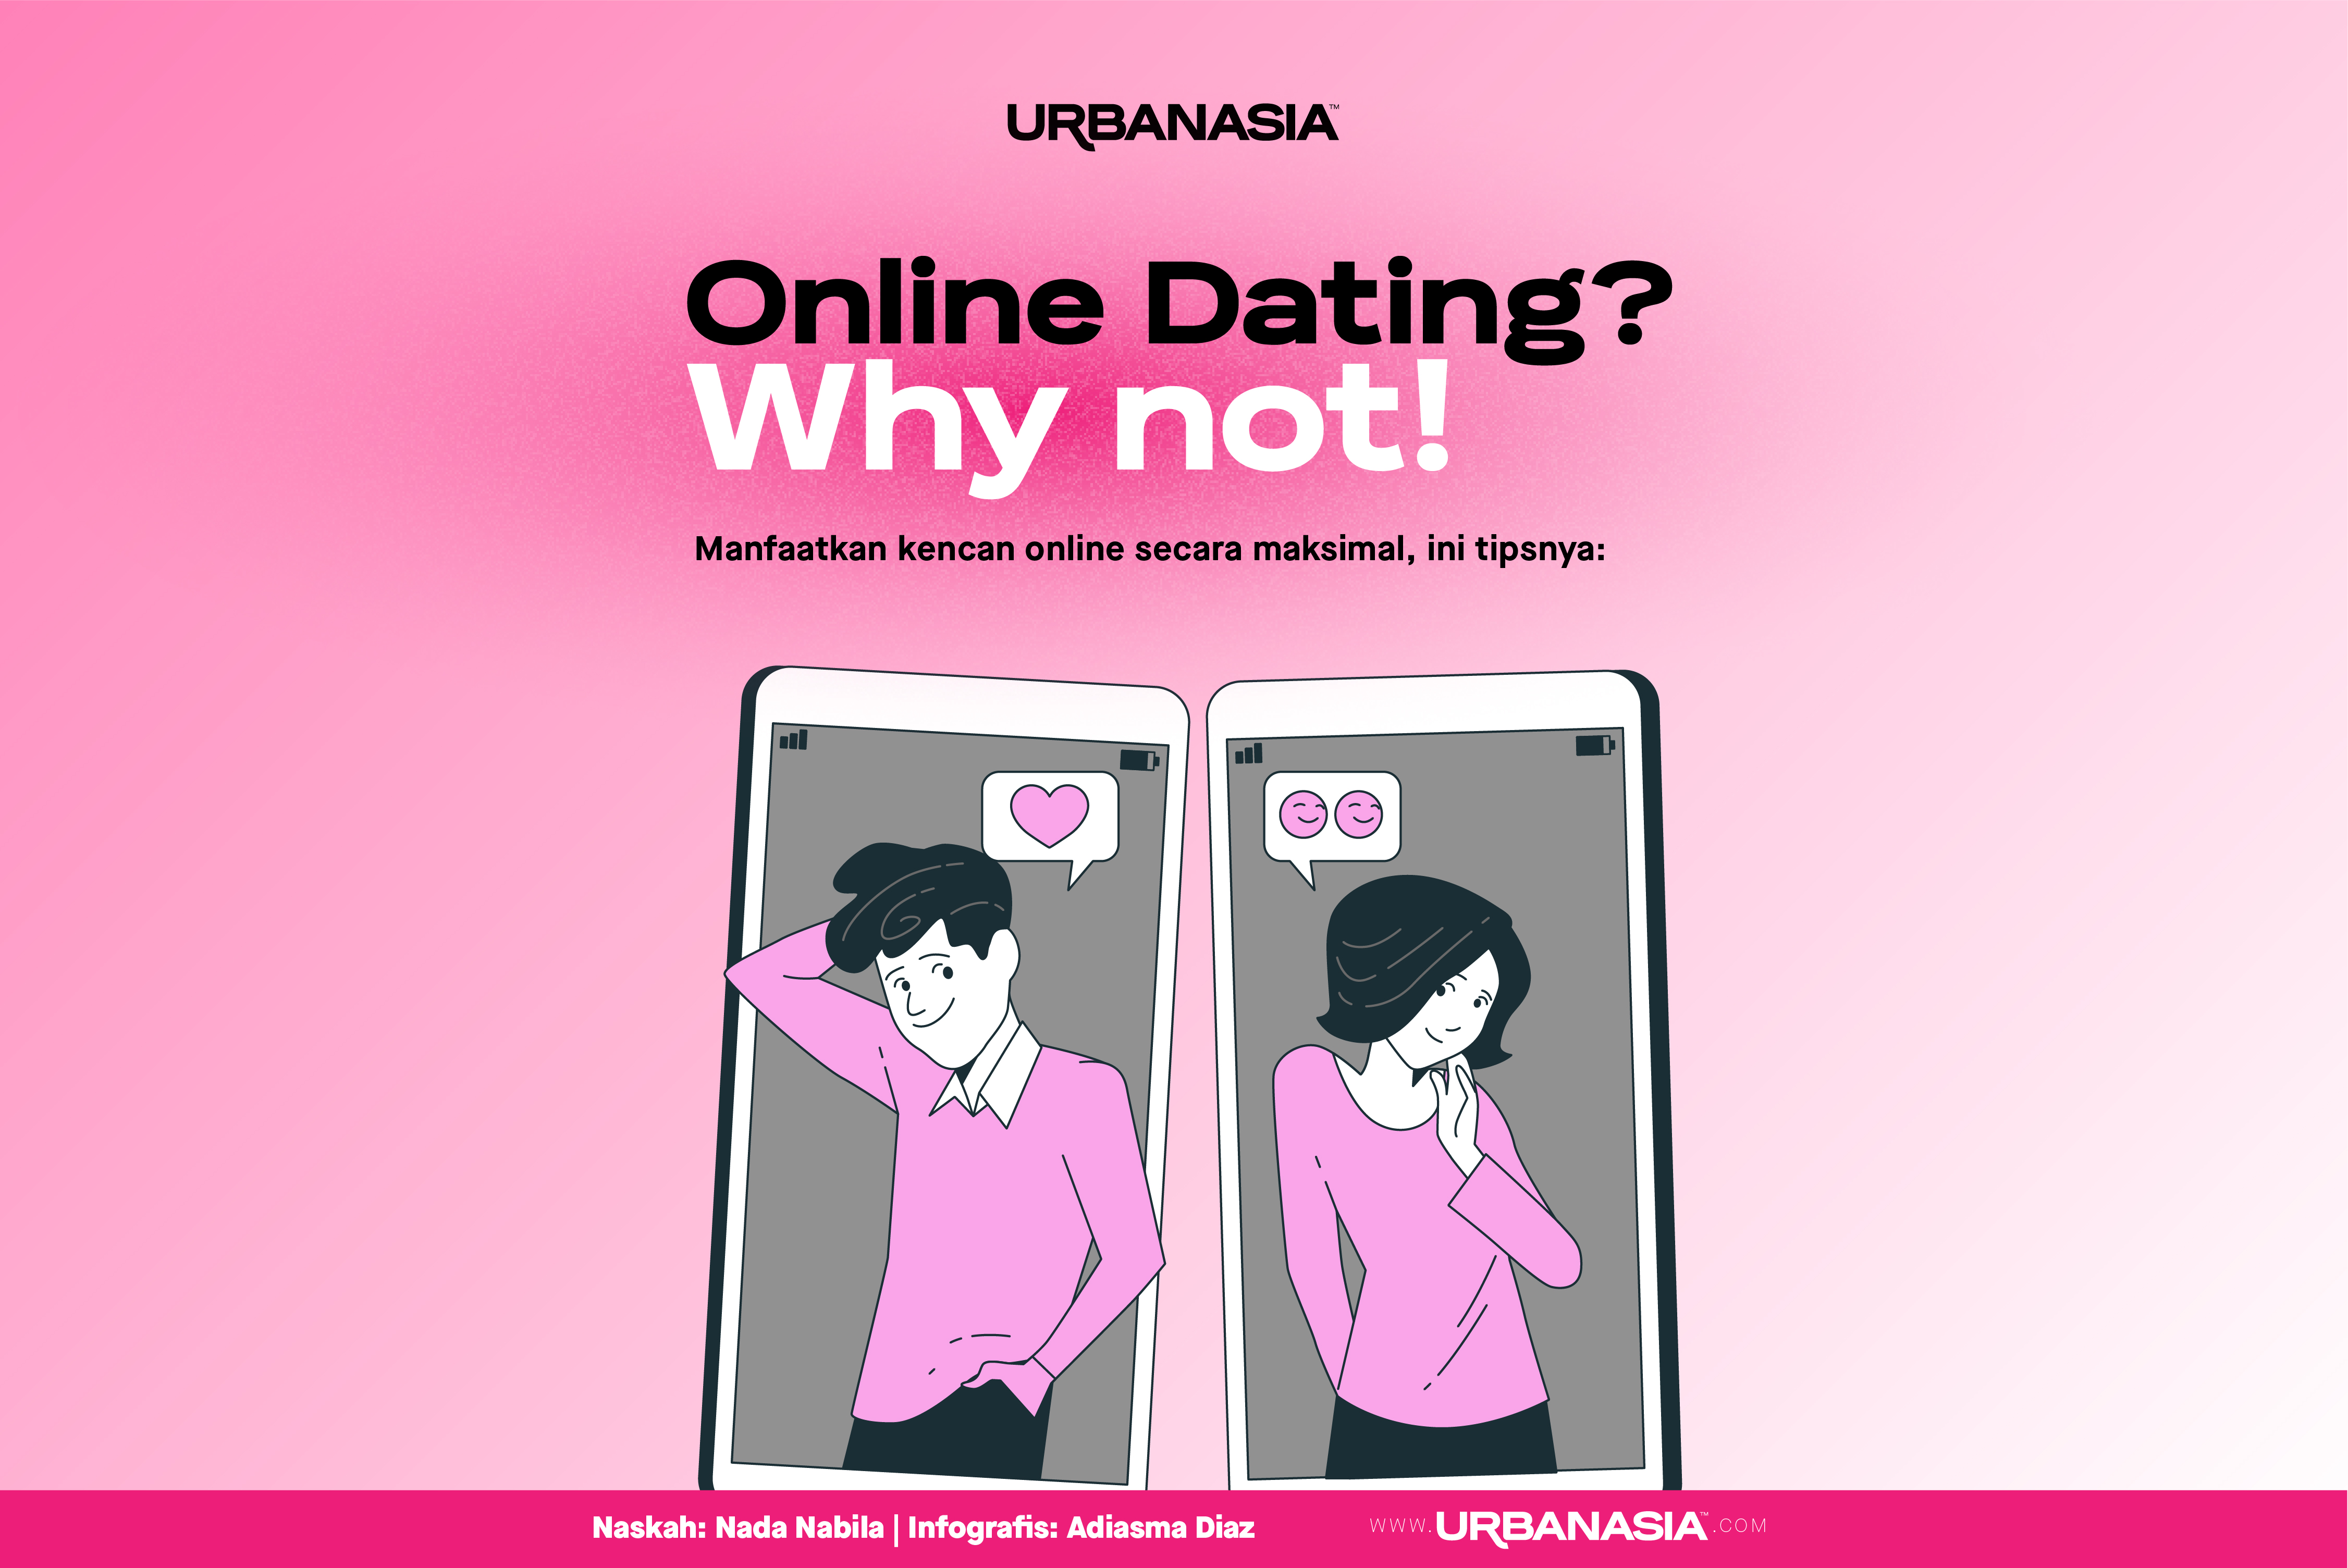 [INFOGRAFIS] Online Dating? Why Not!